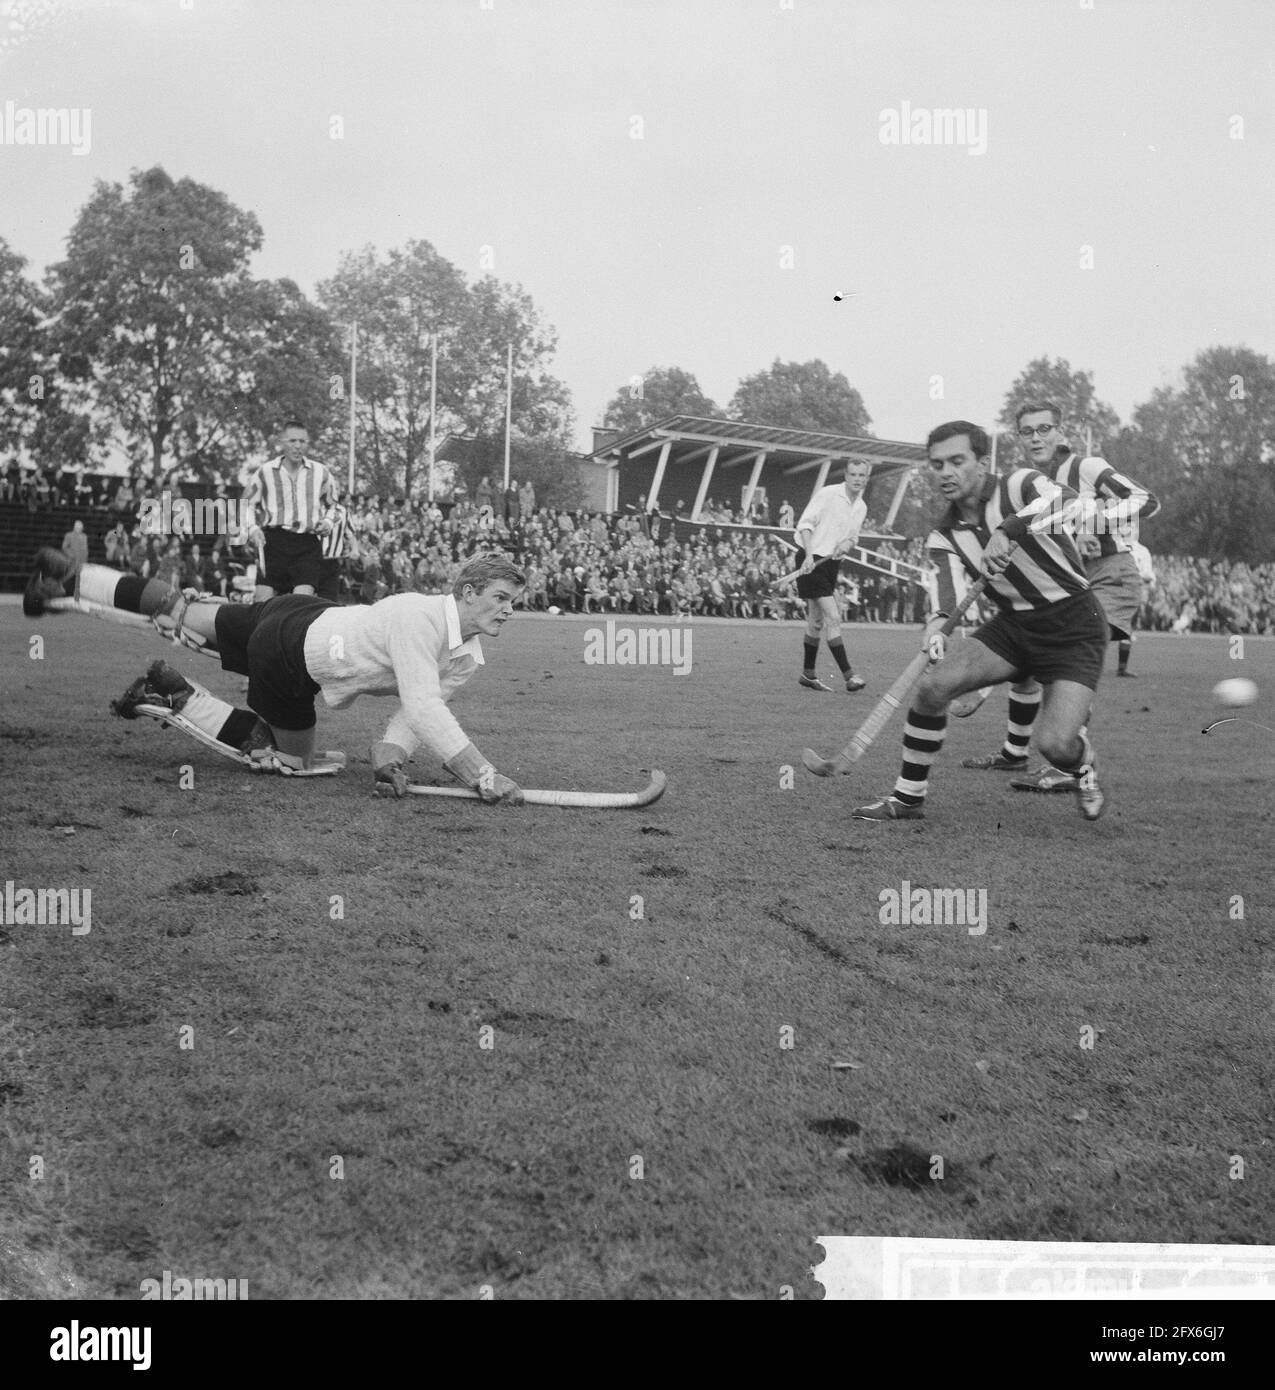 Hockey Amsterdam against HDM in Amstelveen. Goalkeeper Boks fends off attack, October 29, 1961, attacks, field hockey, The Netherlands, 20th century press agency photo, news to remember, documentary, historic photography 1945-1990, visual stories, human history of the Twentieth Century, capturing moments in time Stock Photo